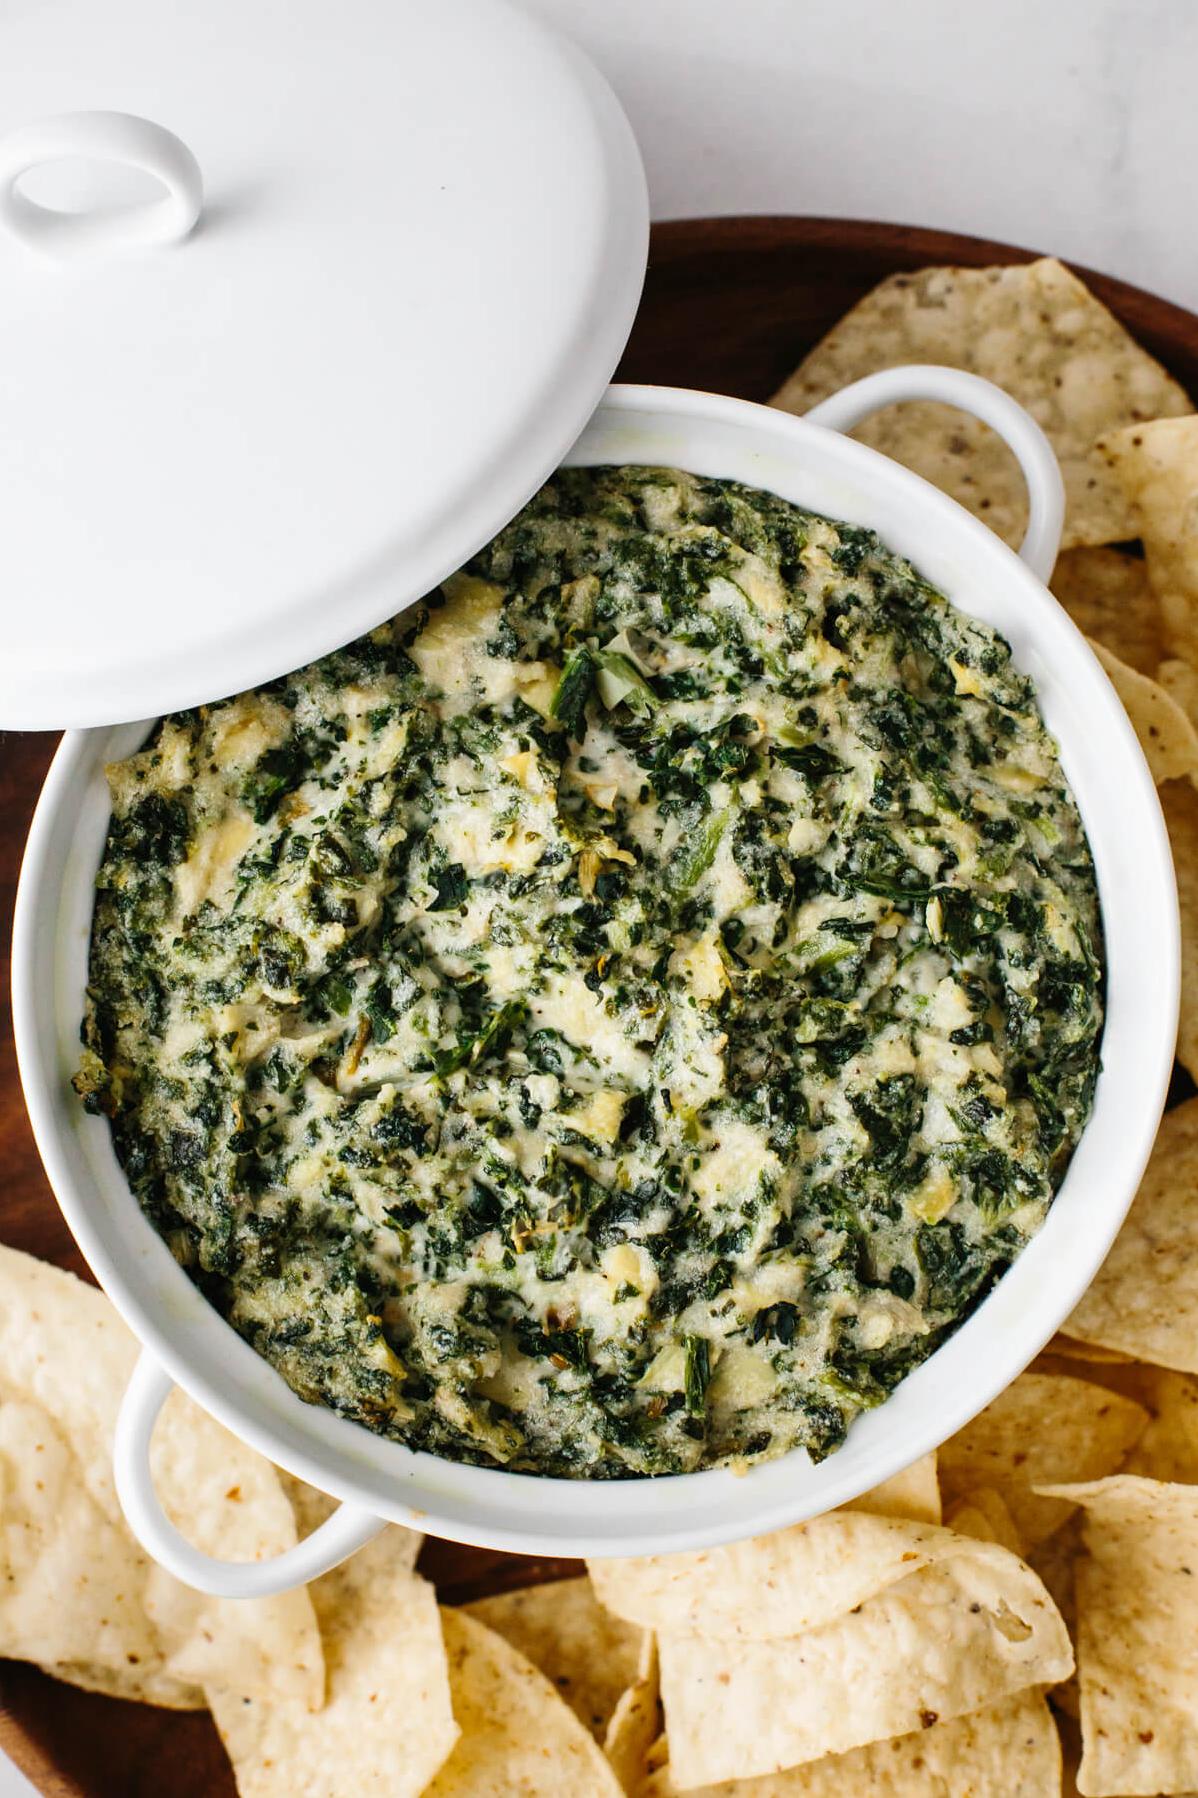  I never thought I could love a dip so much until I tried this vegan version!